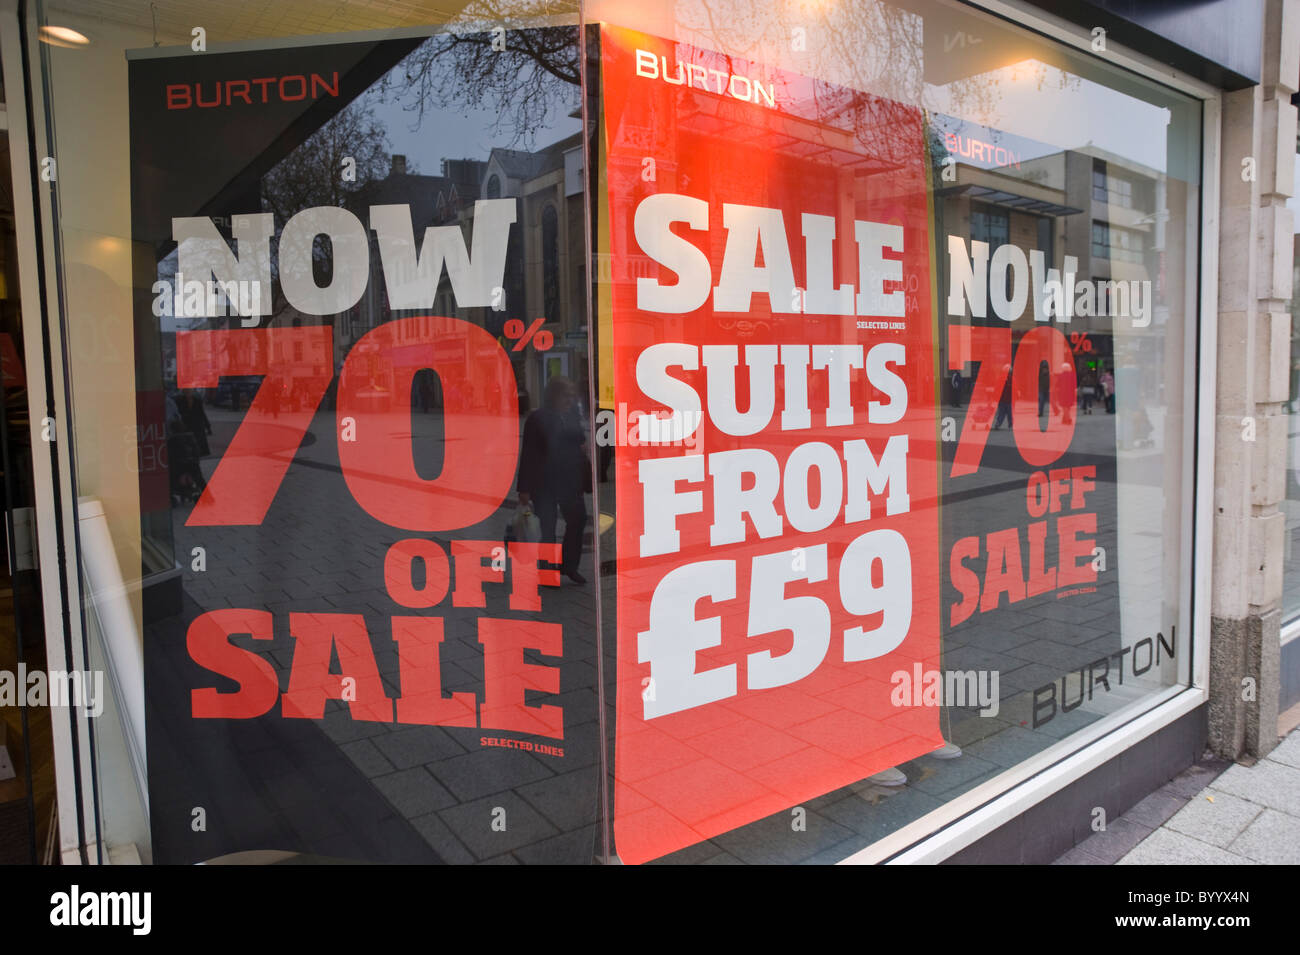 70% off sale with cheap suits at BURTON menswear Cardiff South Wales UK  Stock Photo - Alamy